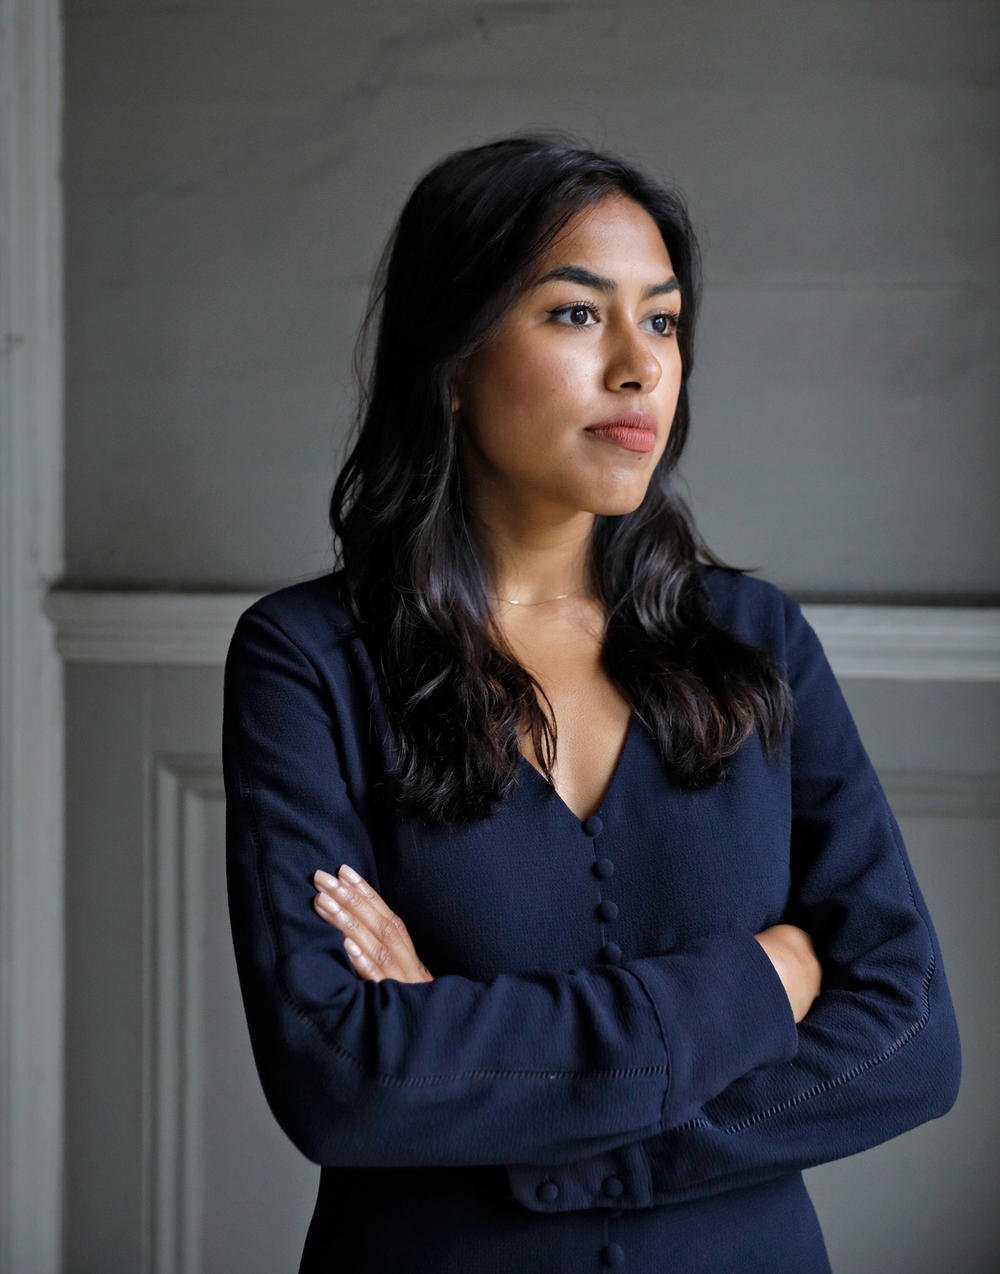 Frustrated by the long hours at J.P. Morgan, Tashrima Hossain decided to quit her high-paying job there early. She is photographed here in San Francisco, Calif. on Wednesday, August 11, 2021.